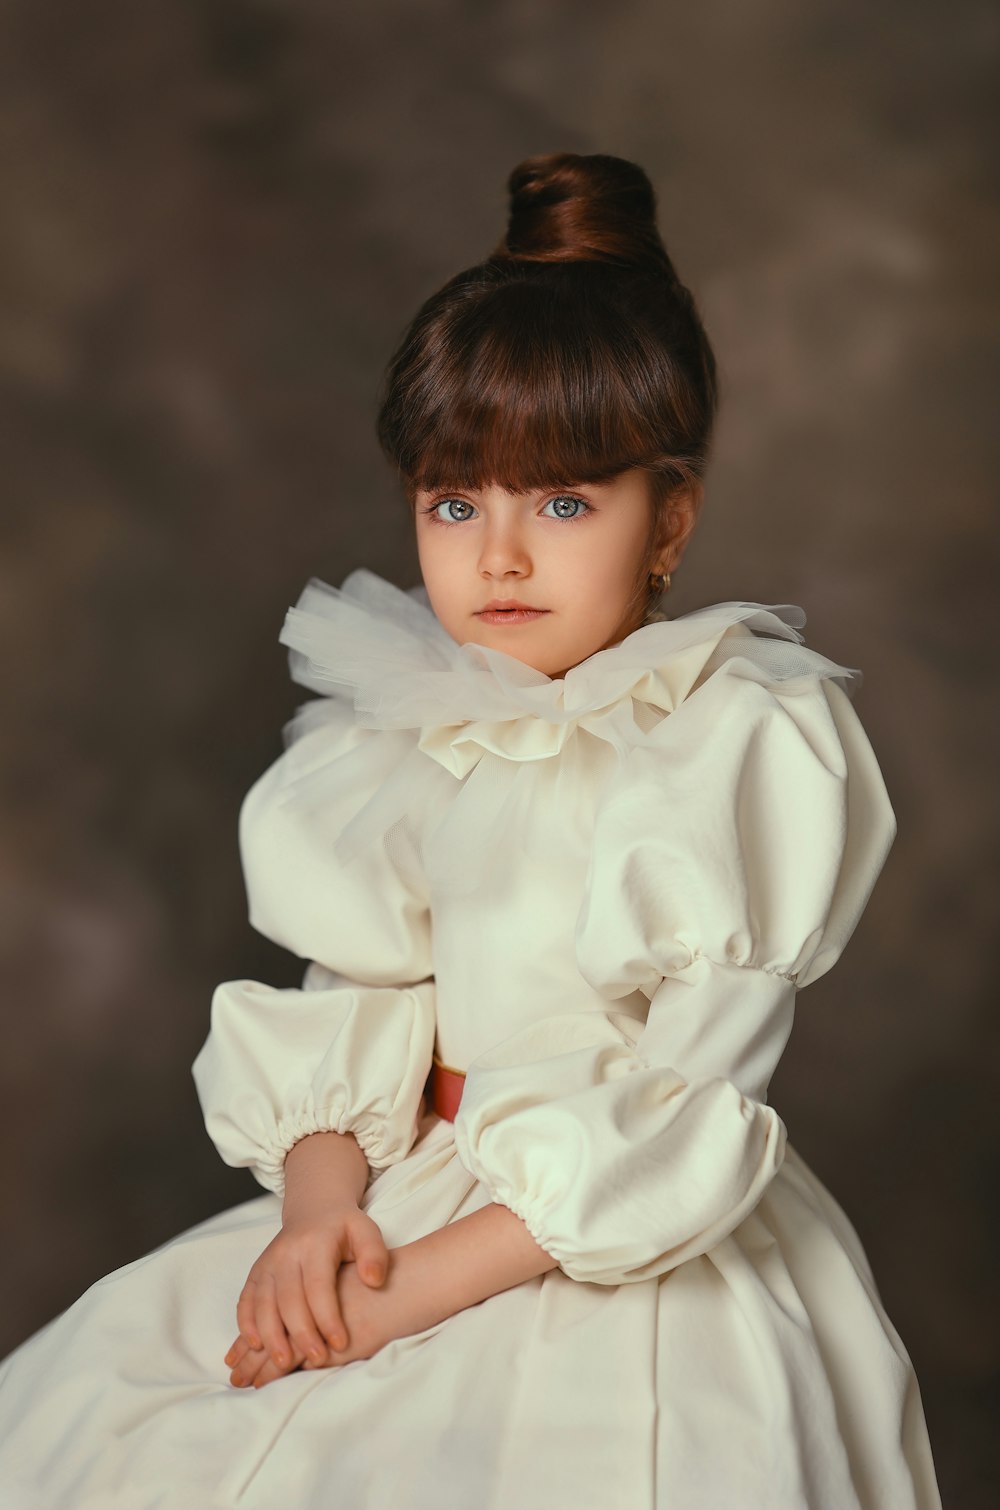 a little girl in a white dress sitting down